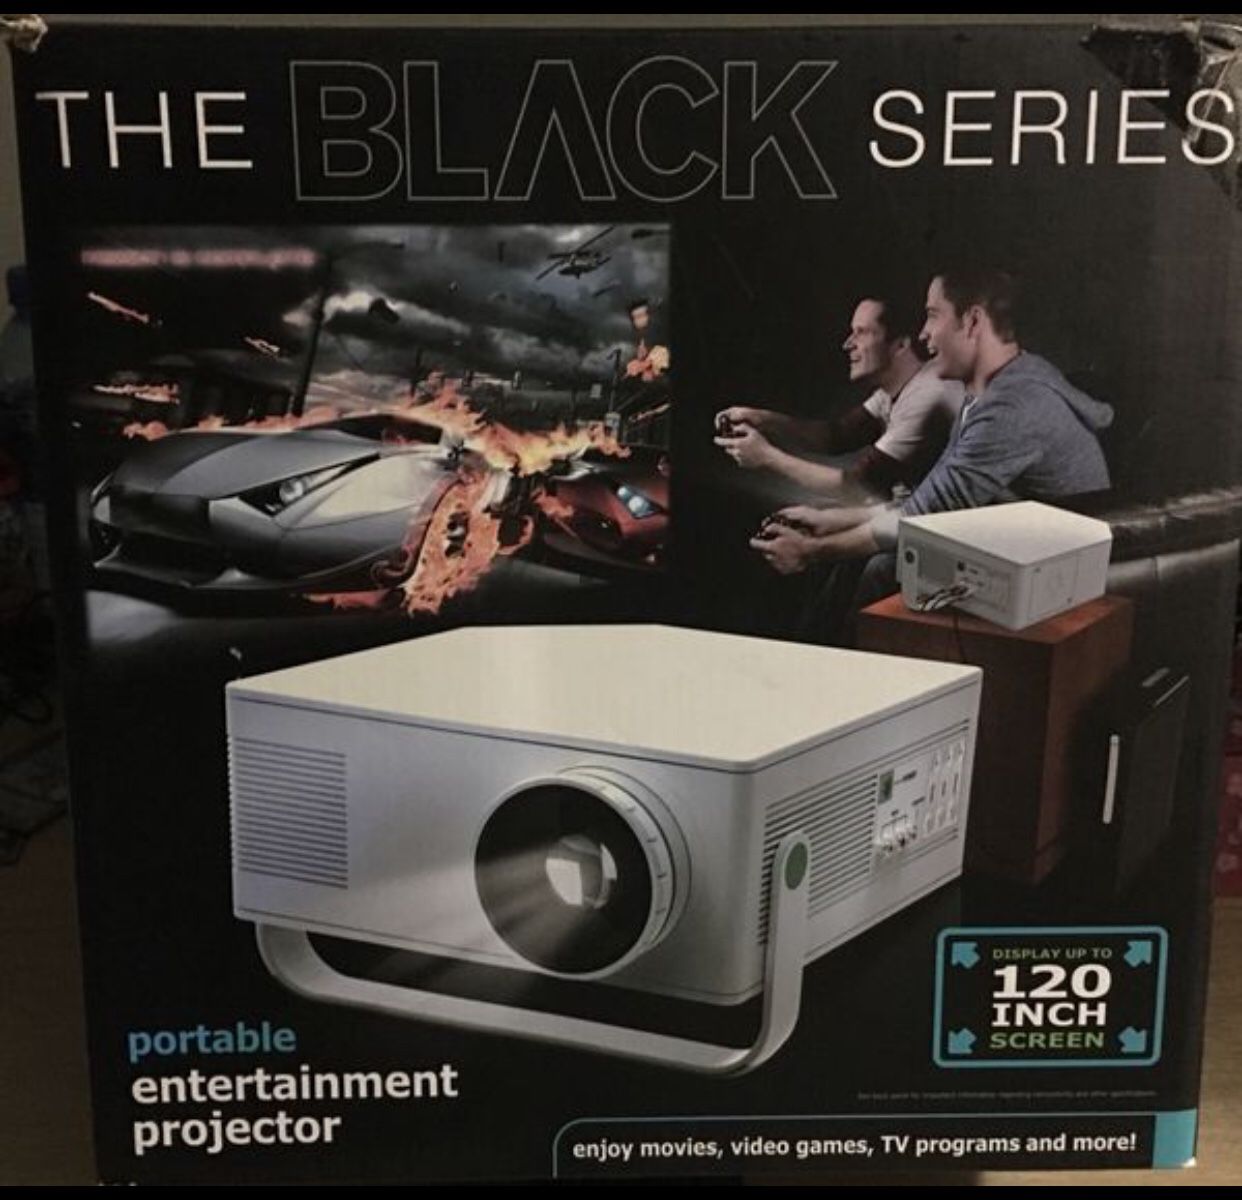 The Black Series Projector